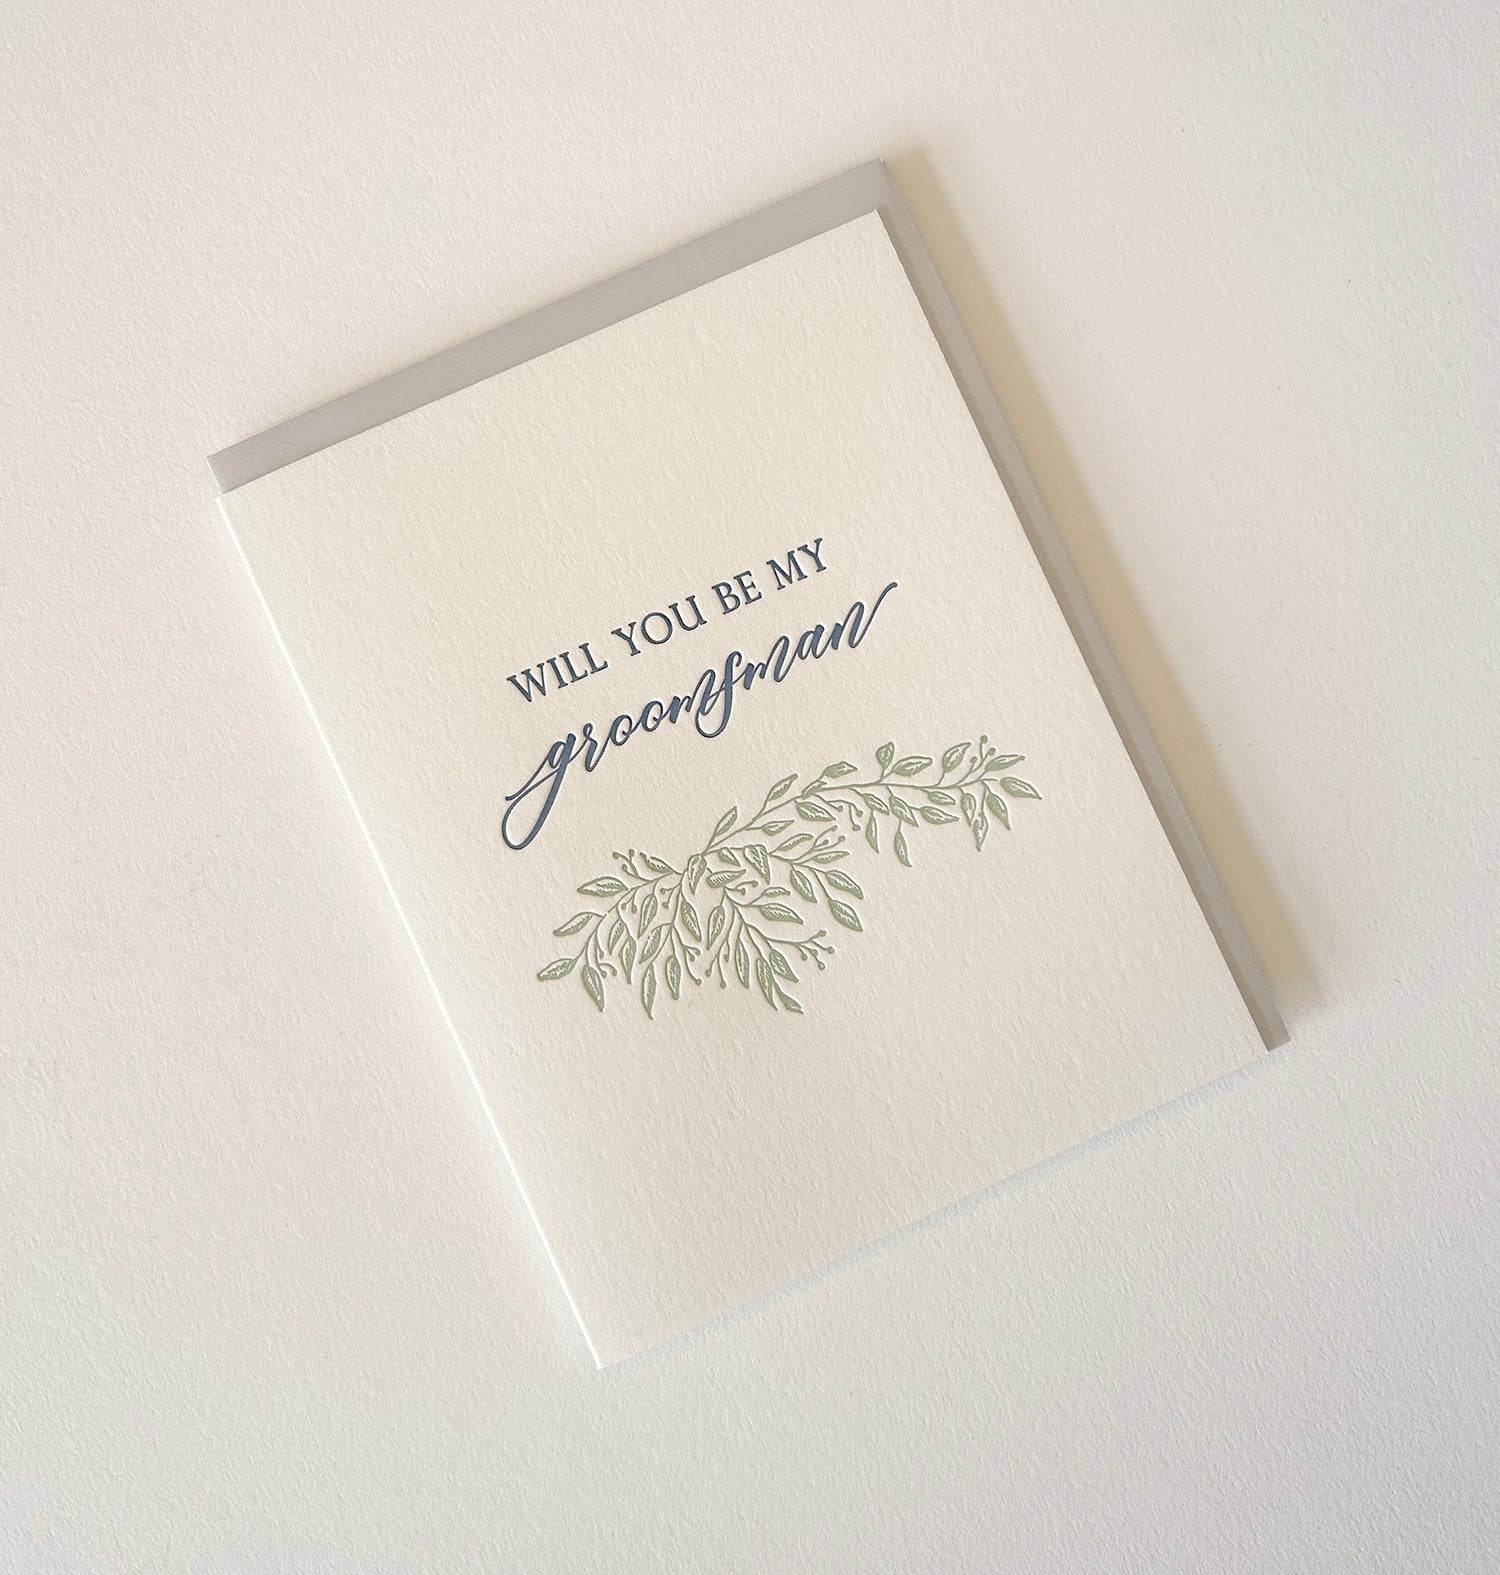 Letterpress wedding card with florals that says " Will You Be My Groomsman" by Rust Belt Love